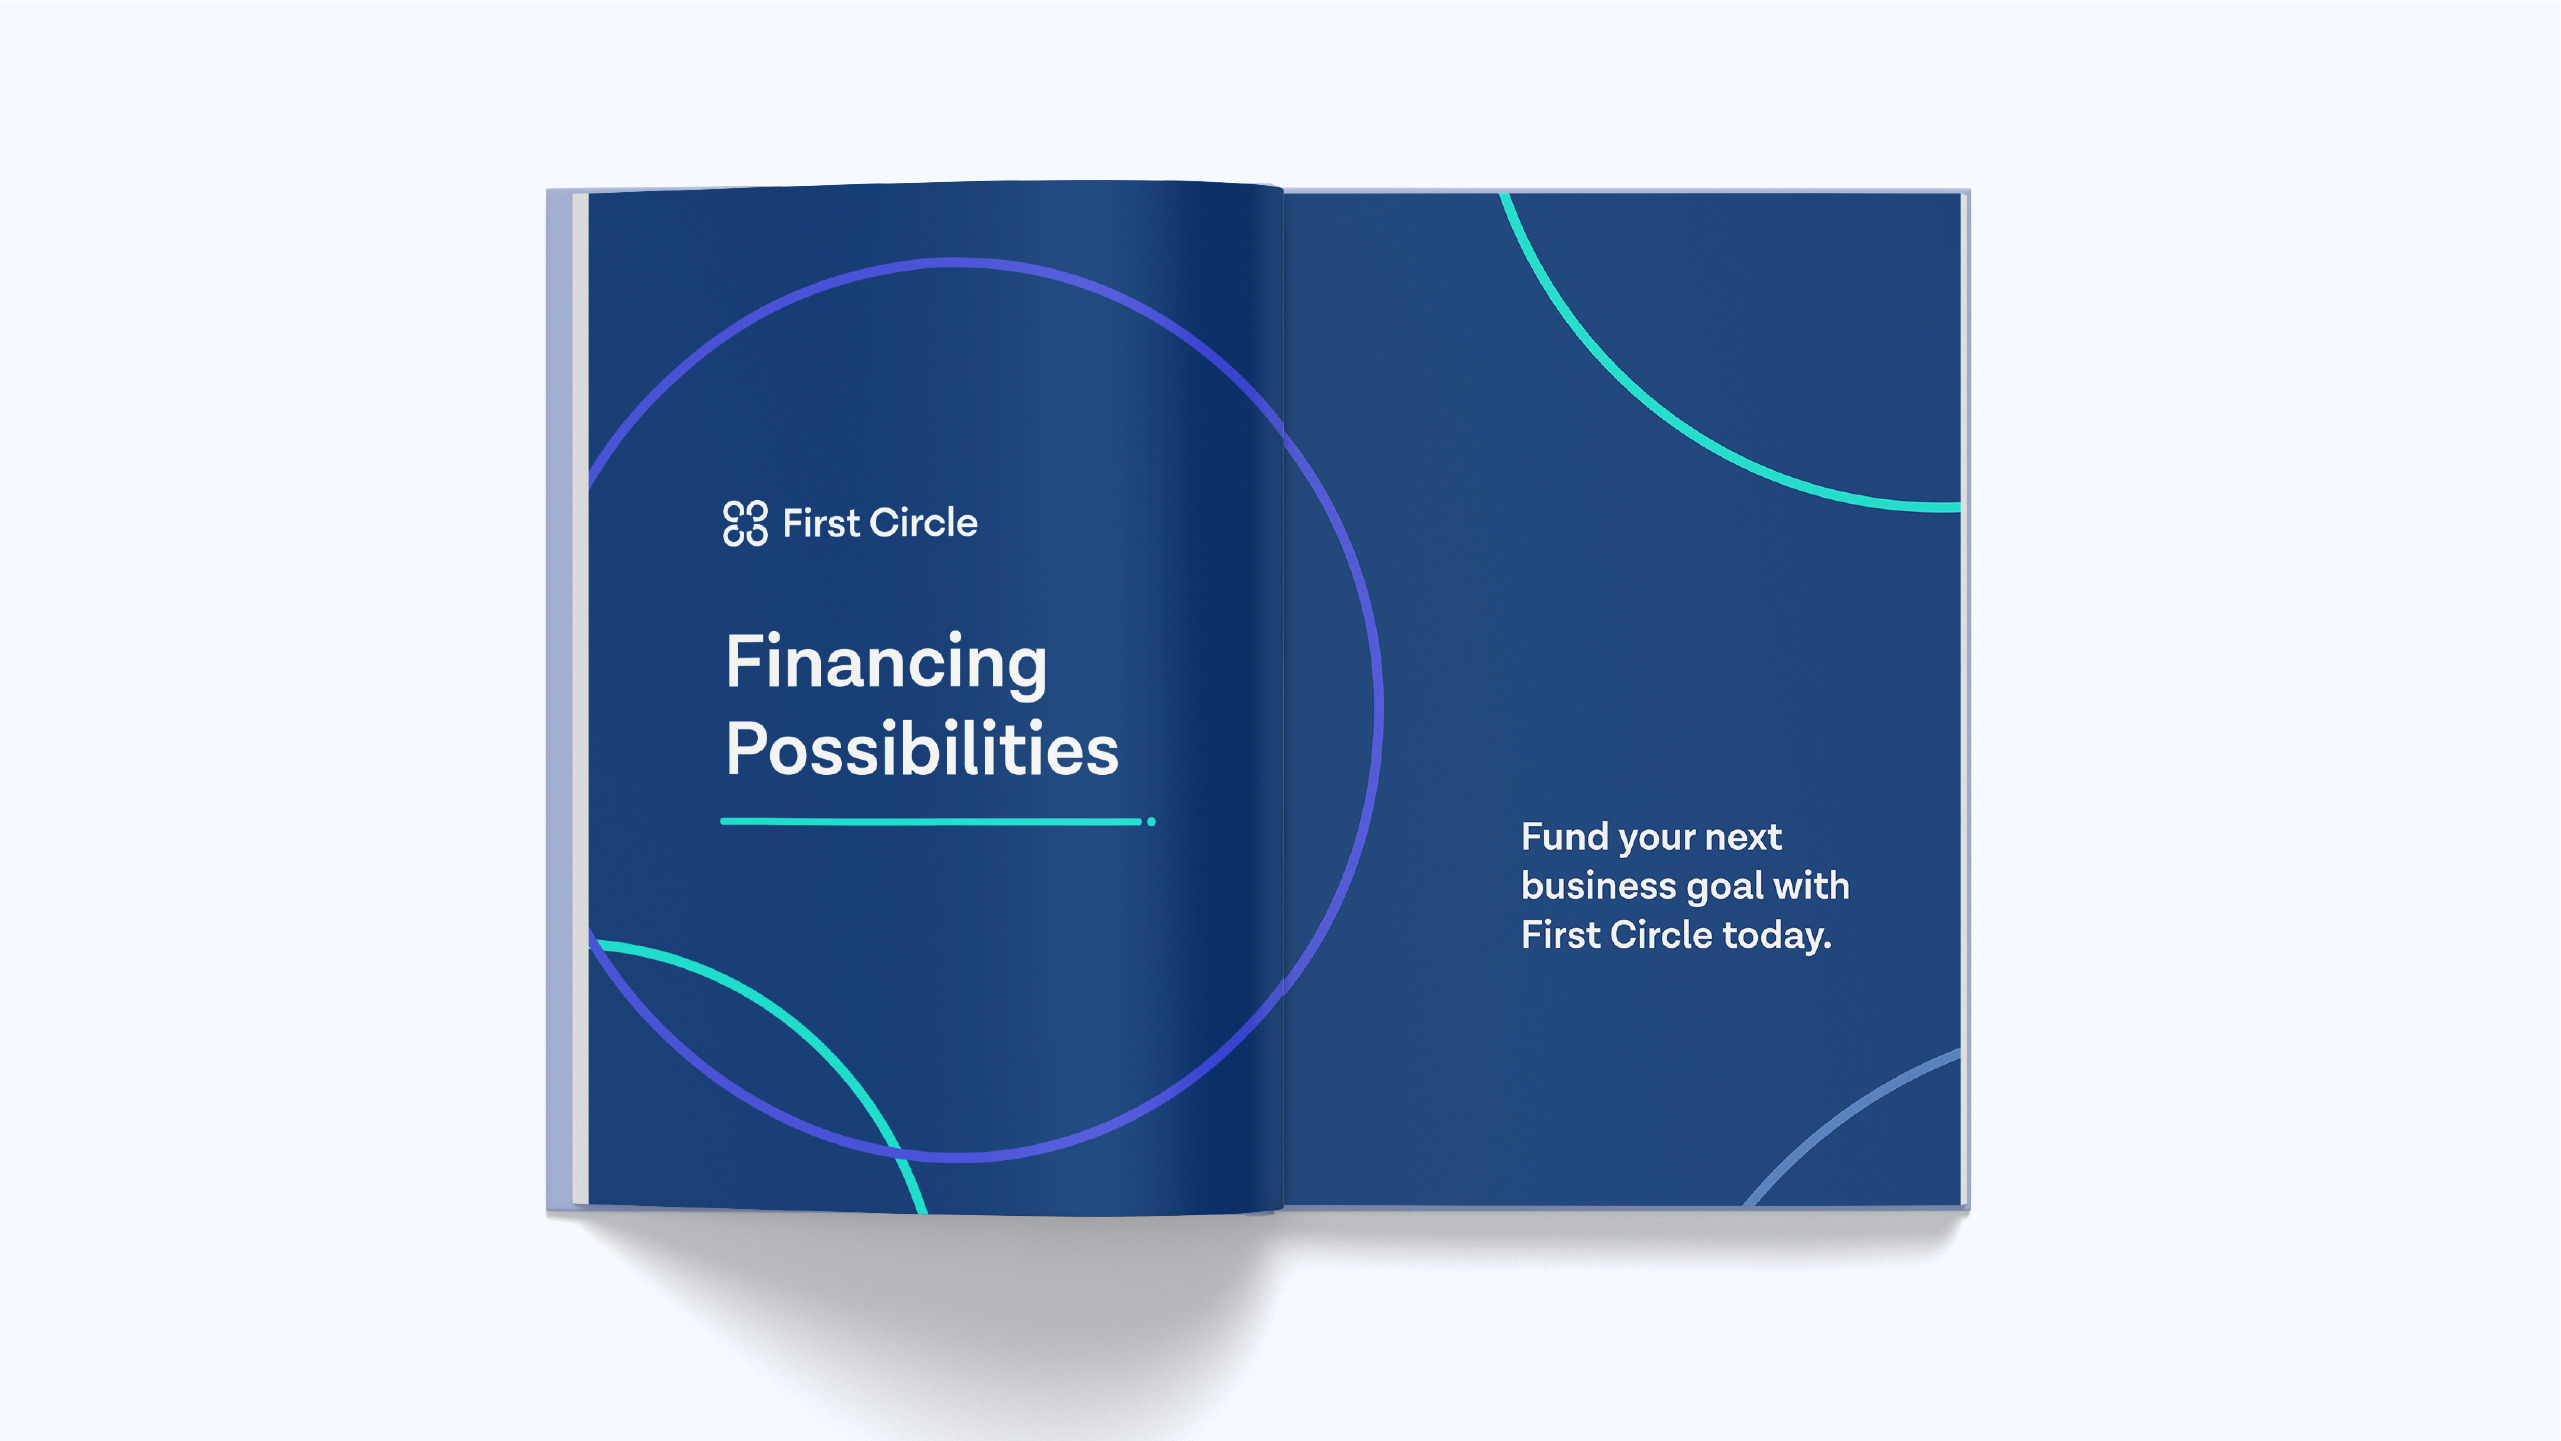 Tone and language guide with geometric elements designed for technology finance brand First Circle